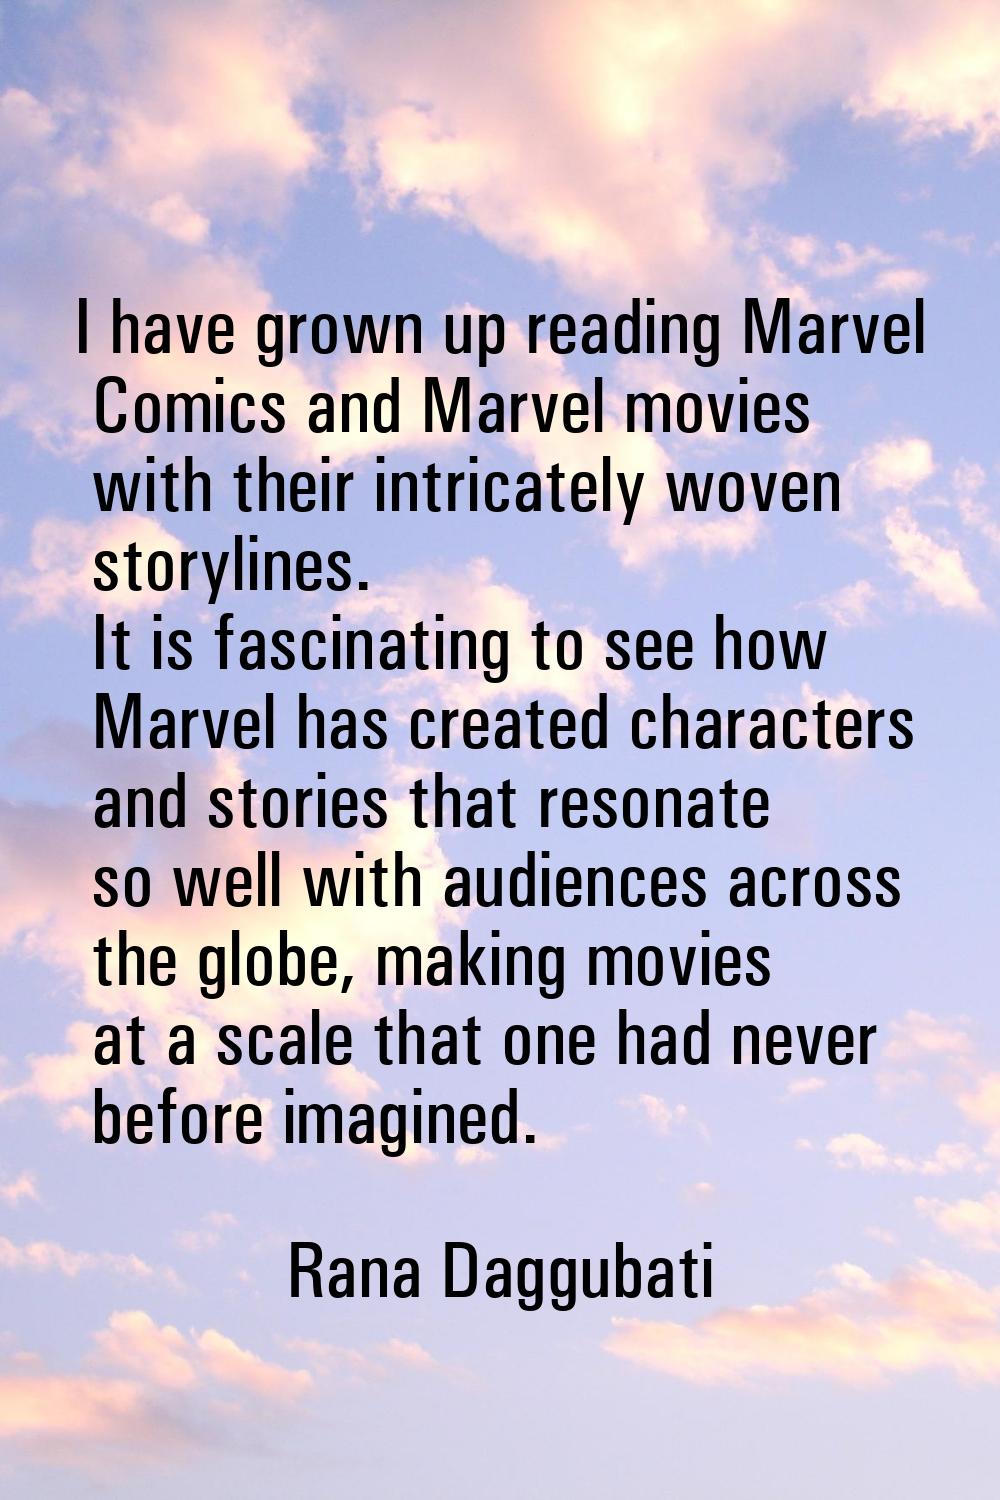 I have grown up reading Marvel Comics and Marvel movies with their intricately woven storylines. It